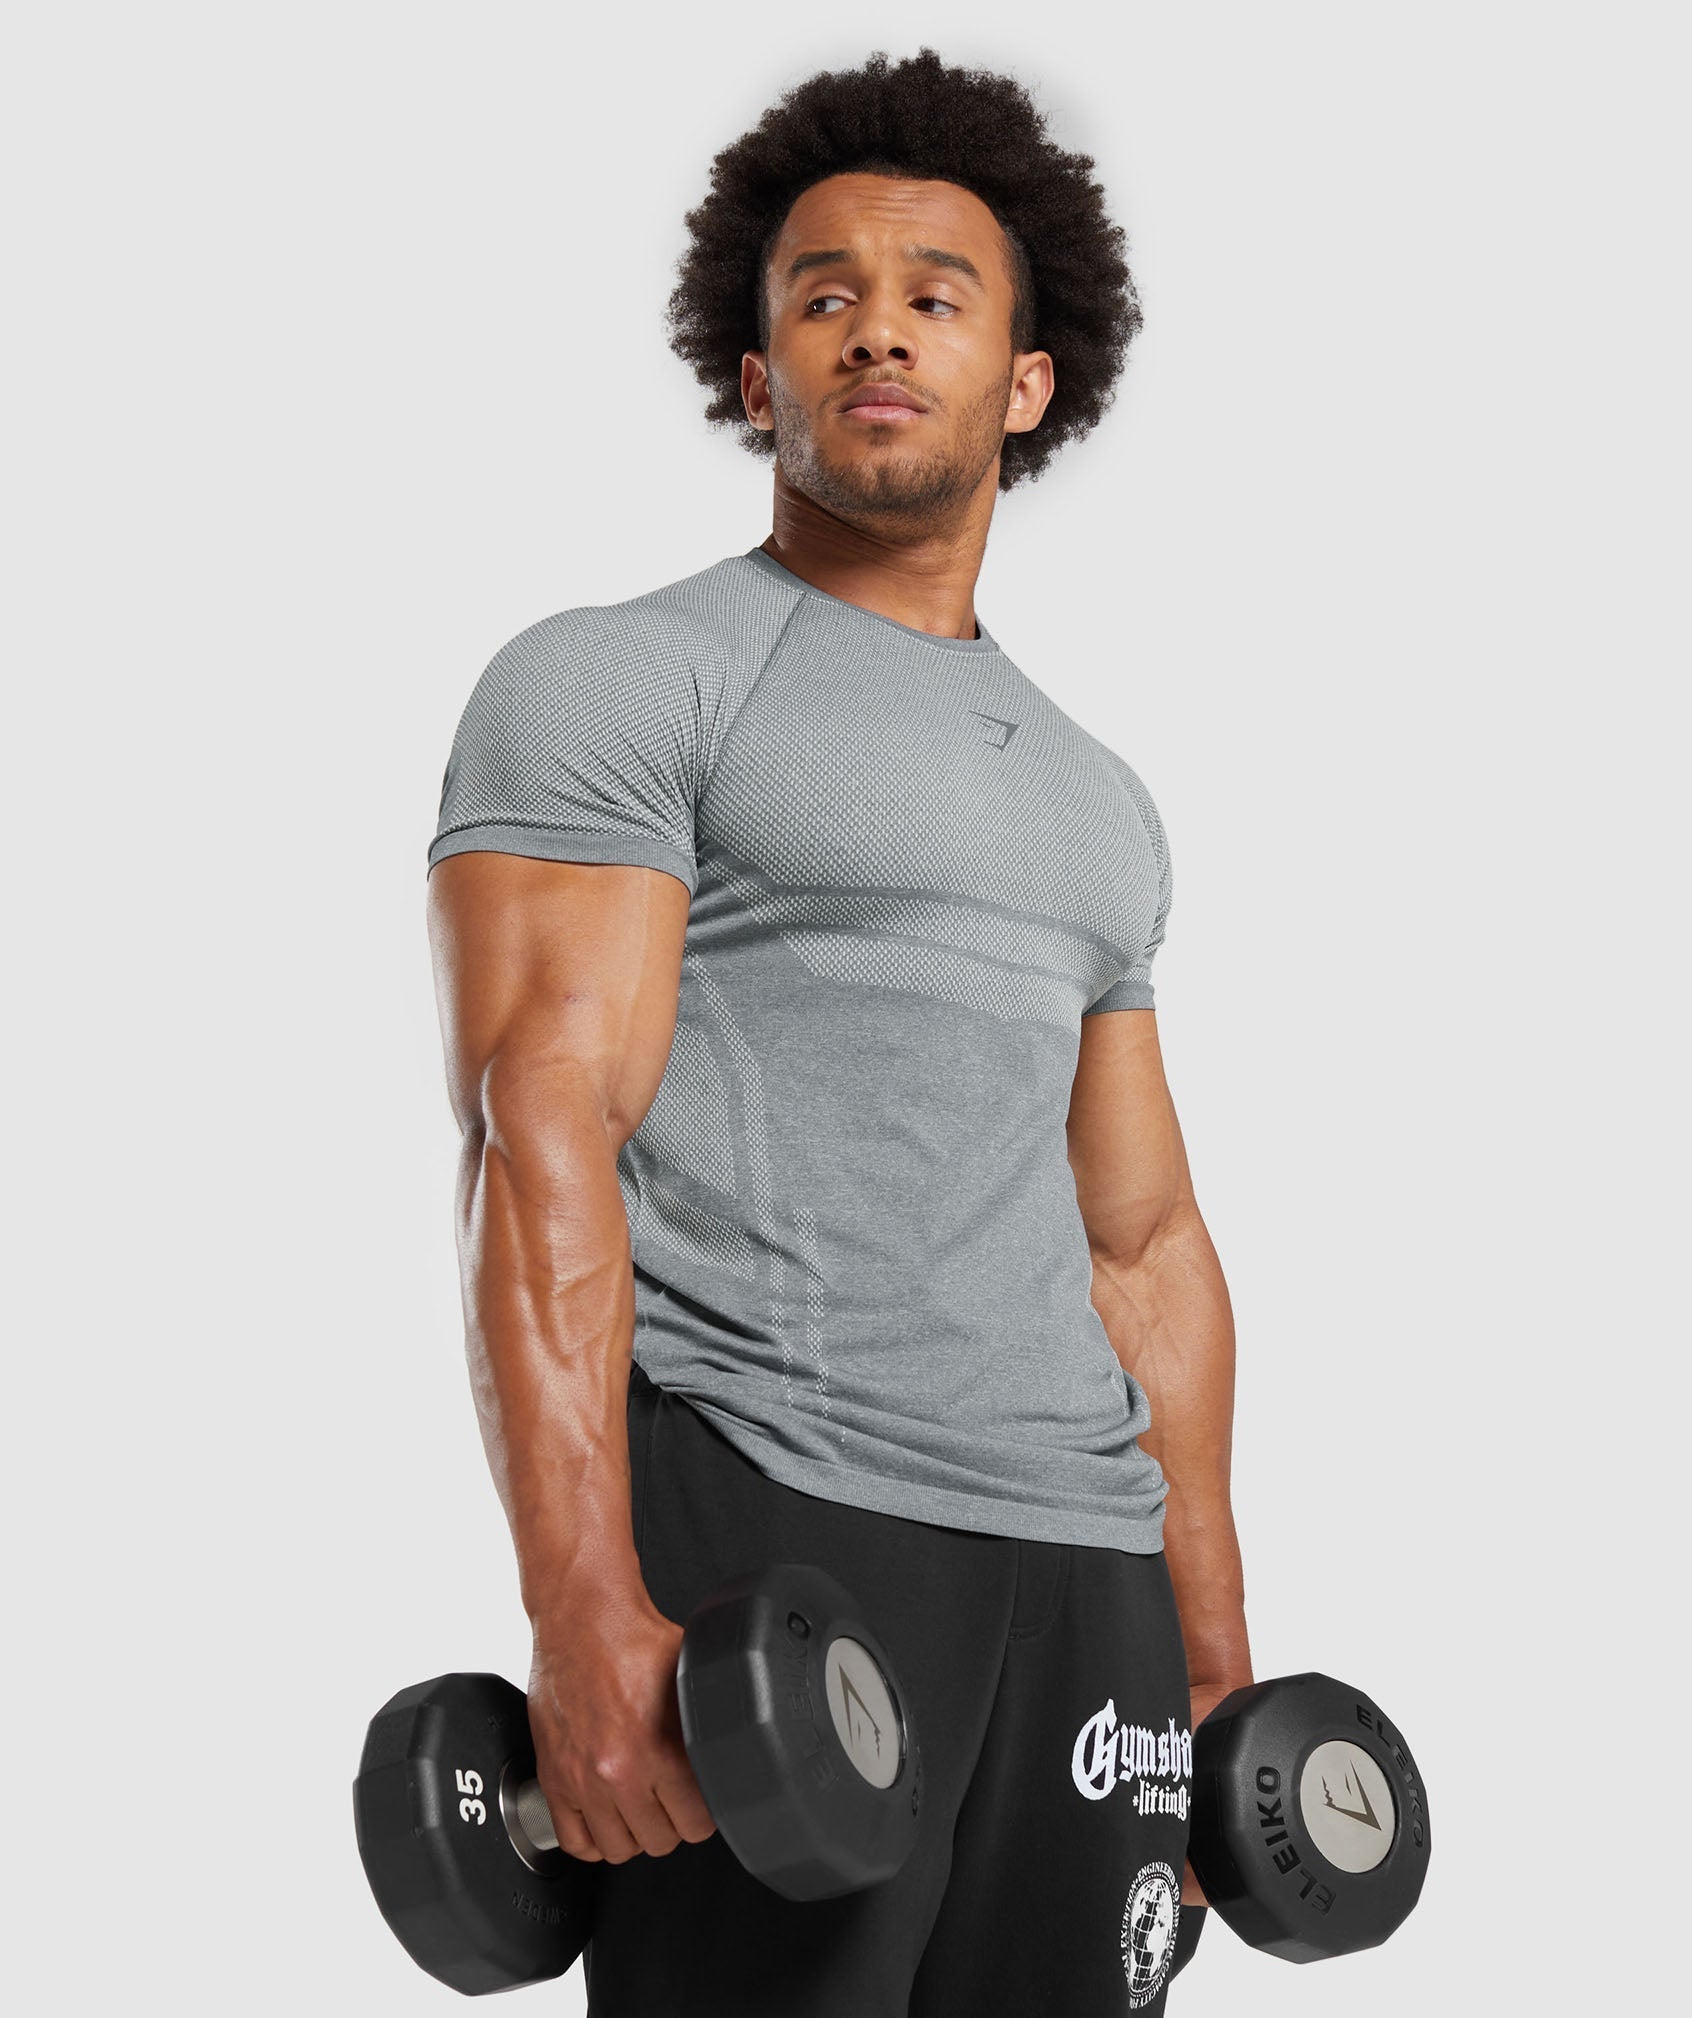 Elite Seamless T-Shirt in Pitch Grey/Light Grey - view 7